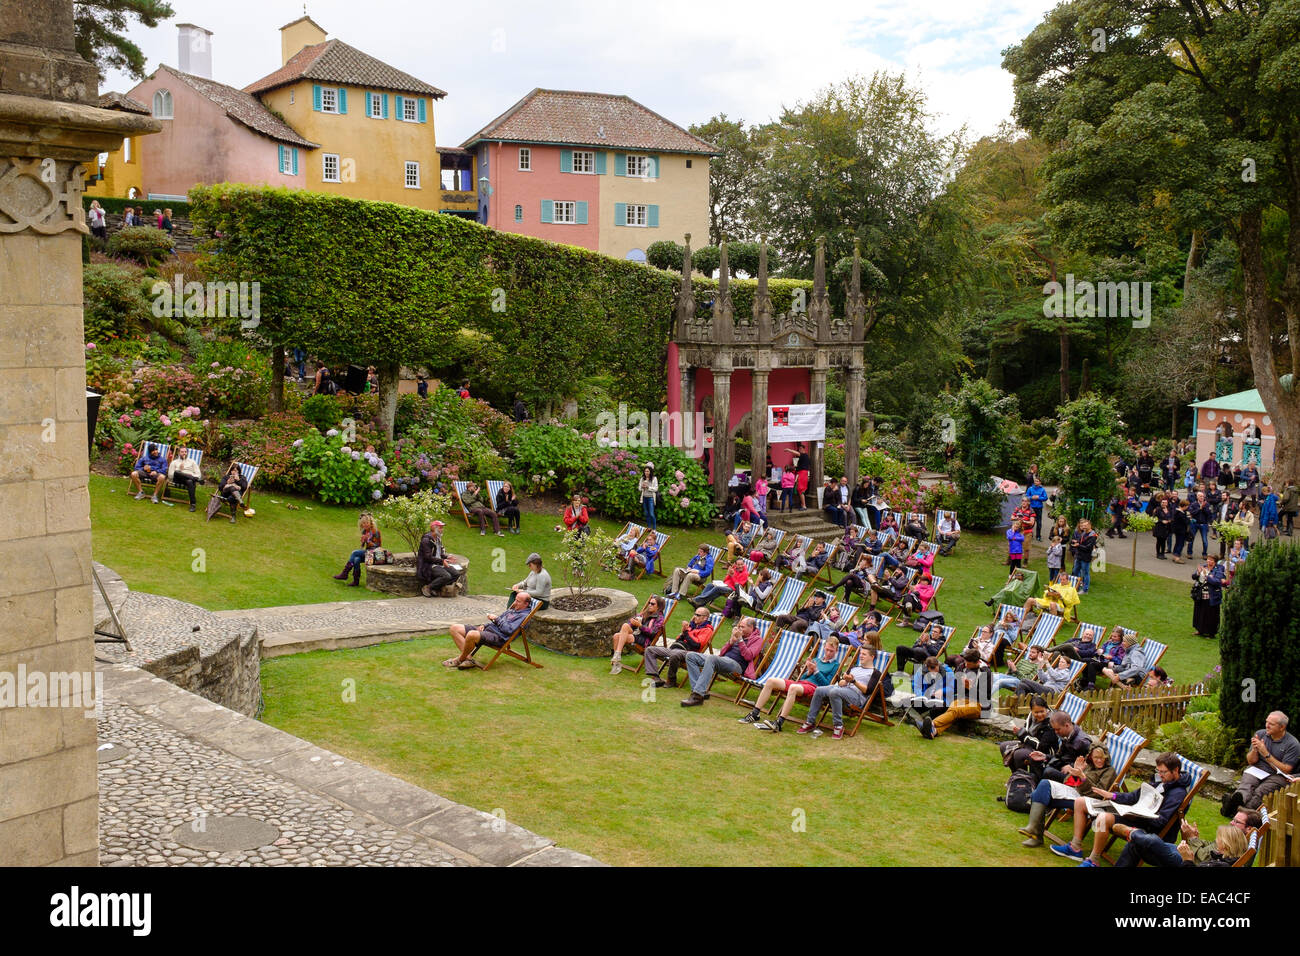 Crowd of People at music festival No.6, Portmeirion, North Wales. Stock Photo